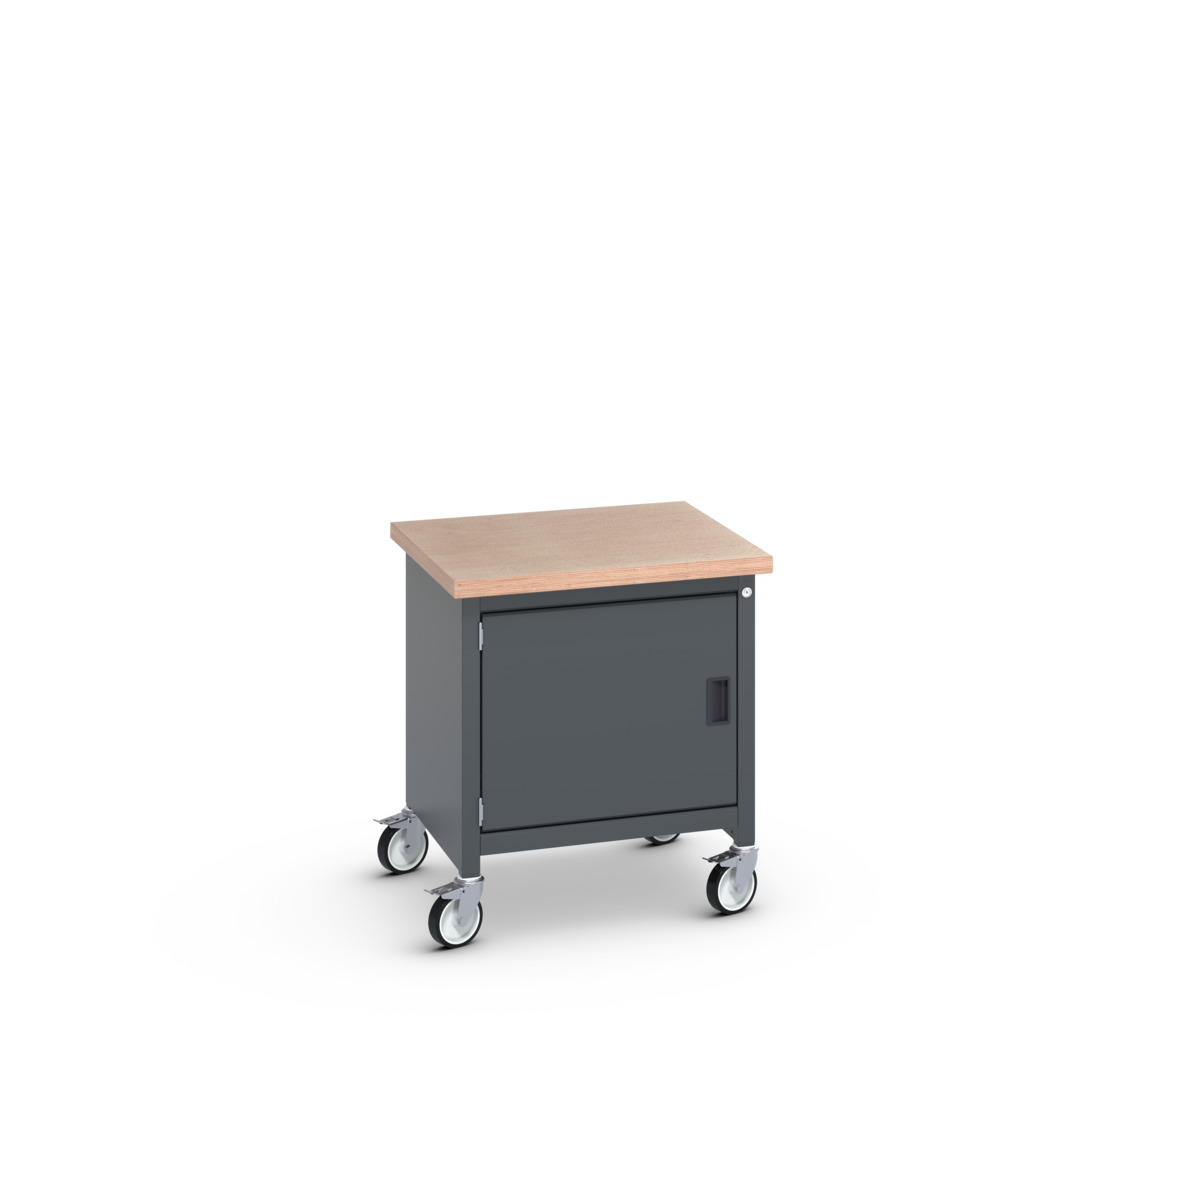 41002085.77V - cubio mobile storage bench (mpx)